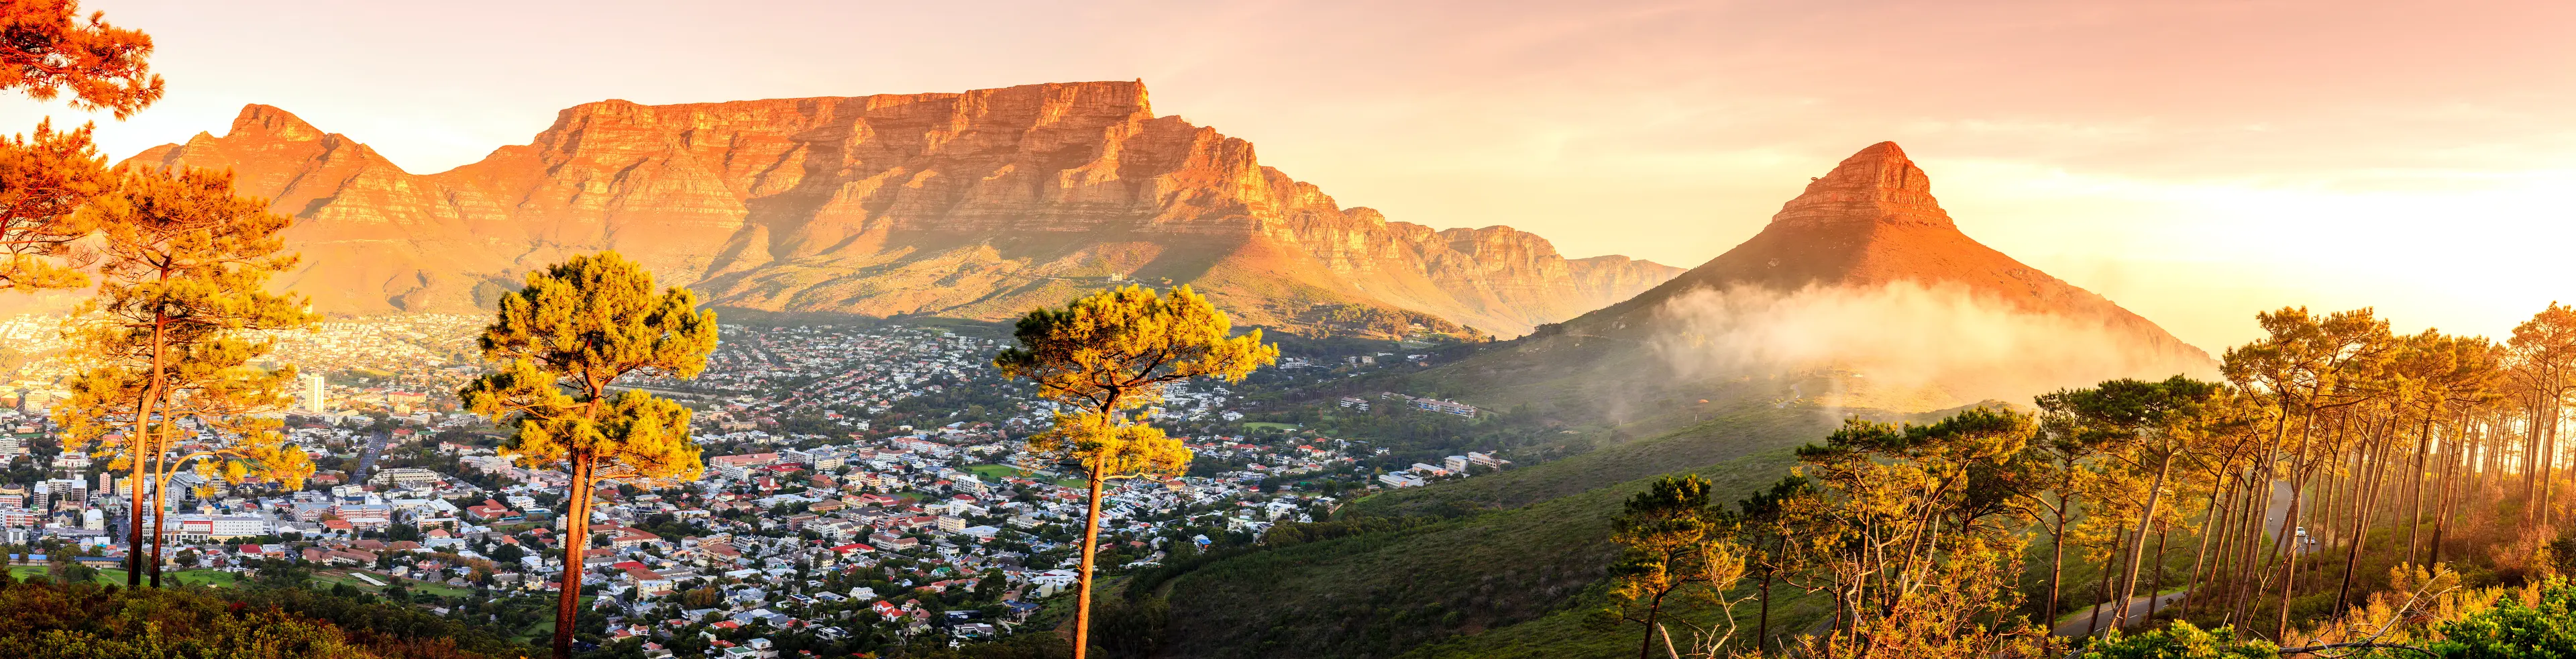 2-Day Offbeat Outdoor Adventure and Sightseeing in Cape Town